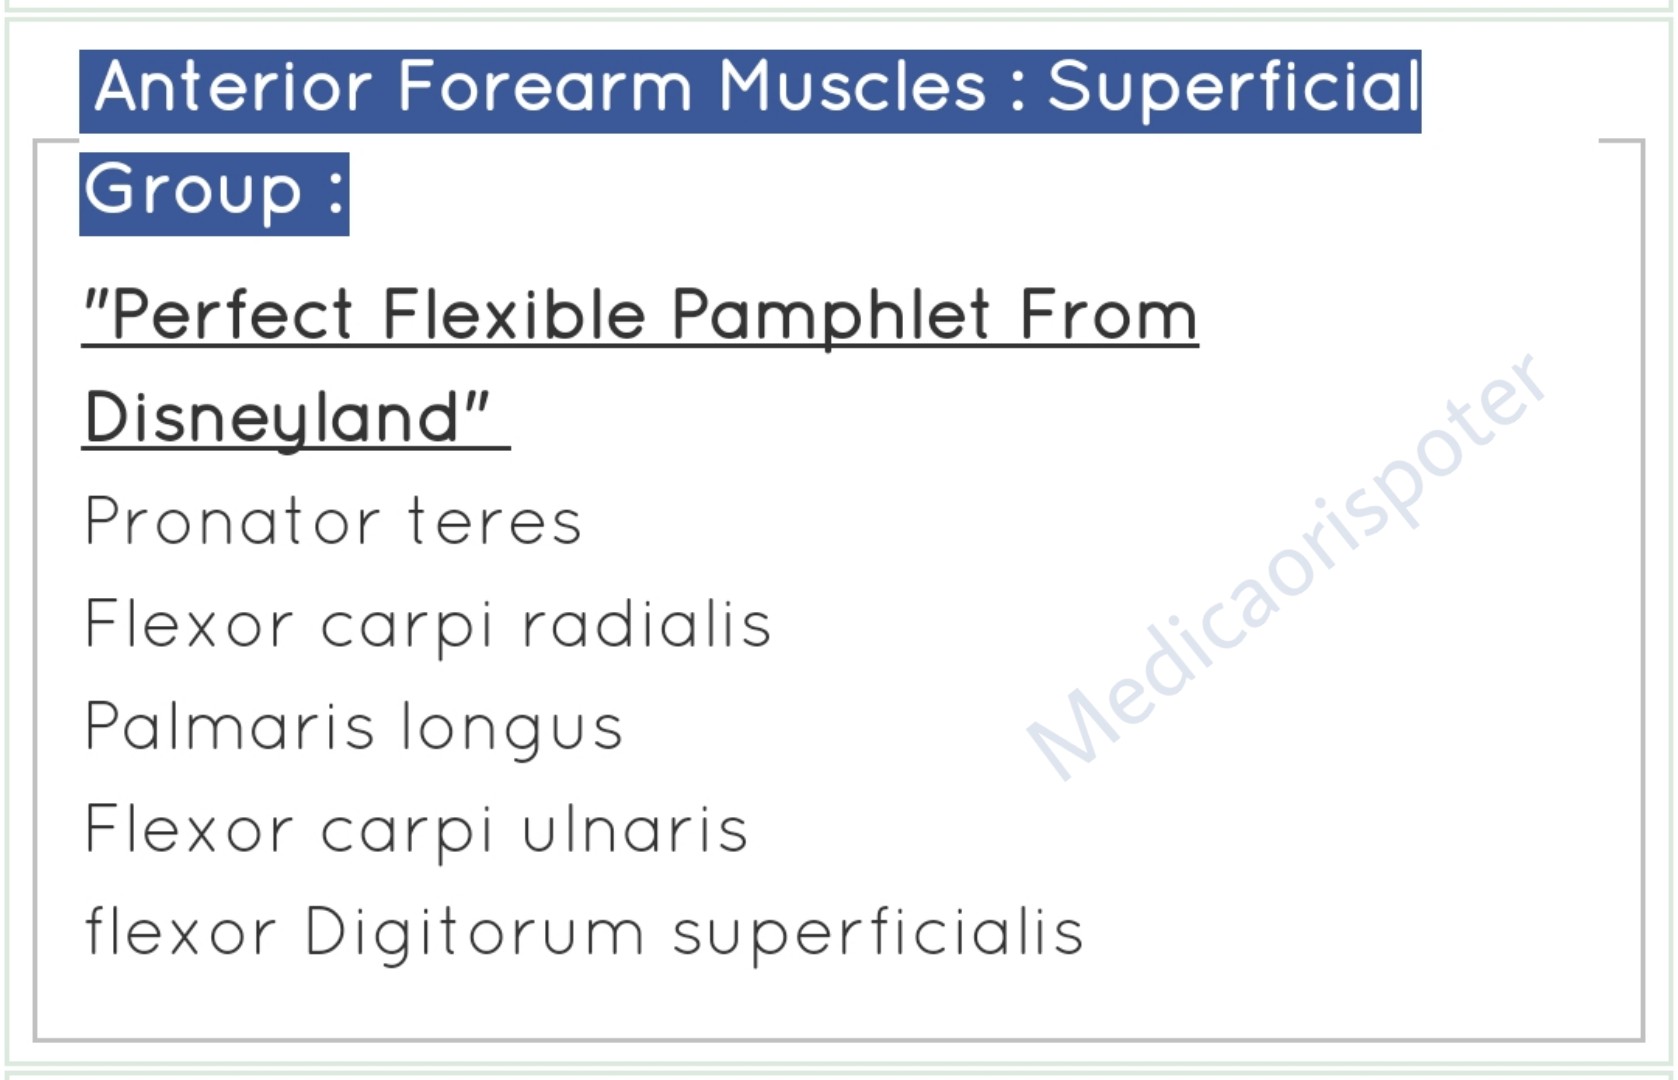 Anterior Forearm Muscles Superficial Group 